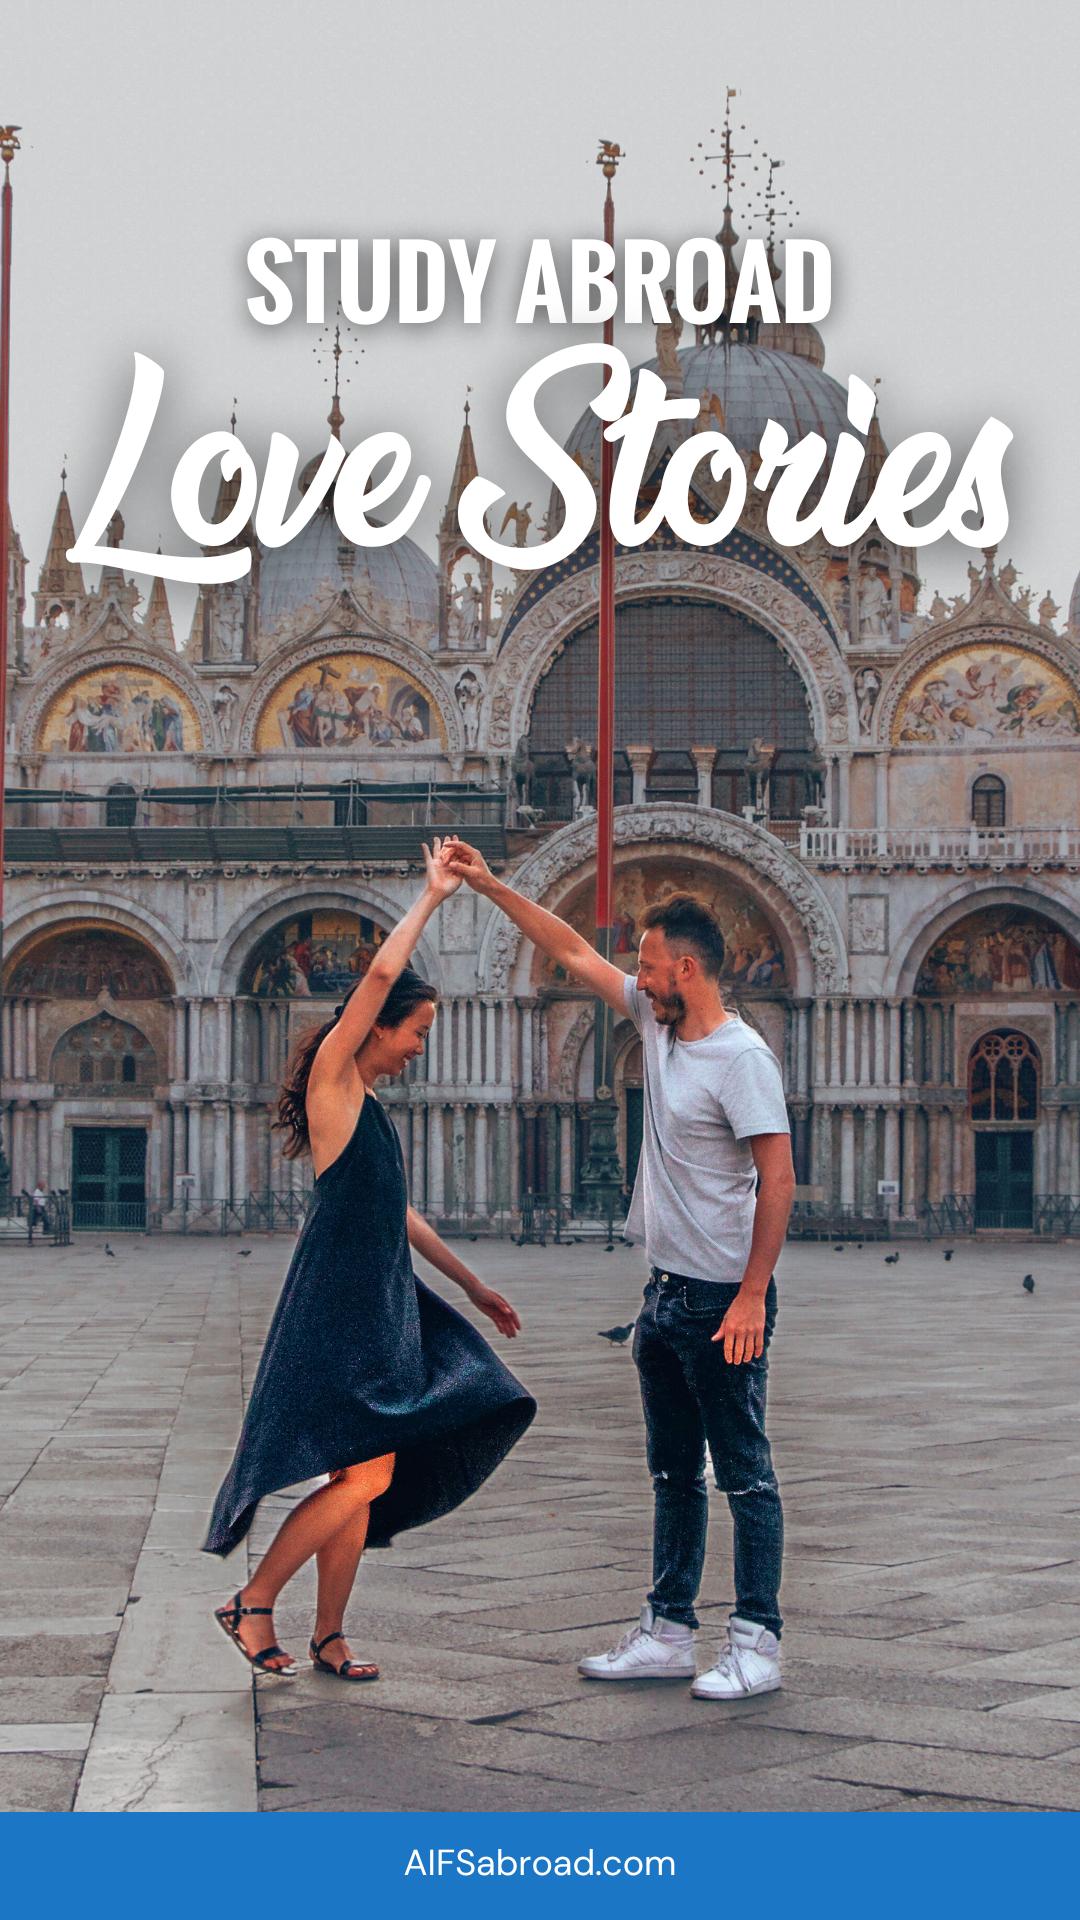 Pin image: young couple dancing alone in st. mark's square, venice, italy with text overlay "study abroad love stories"